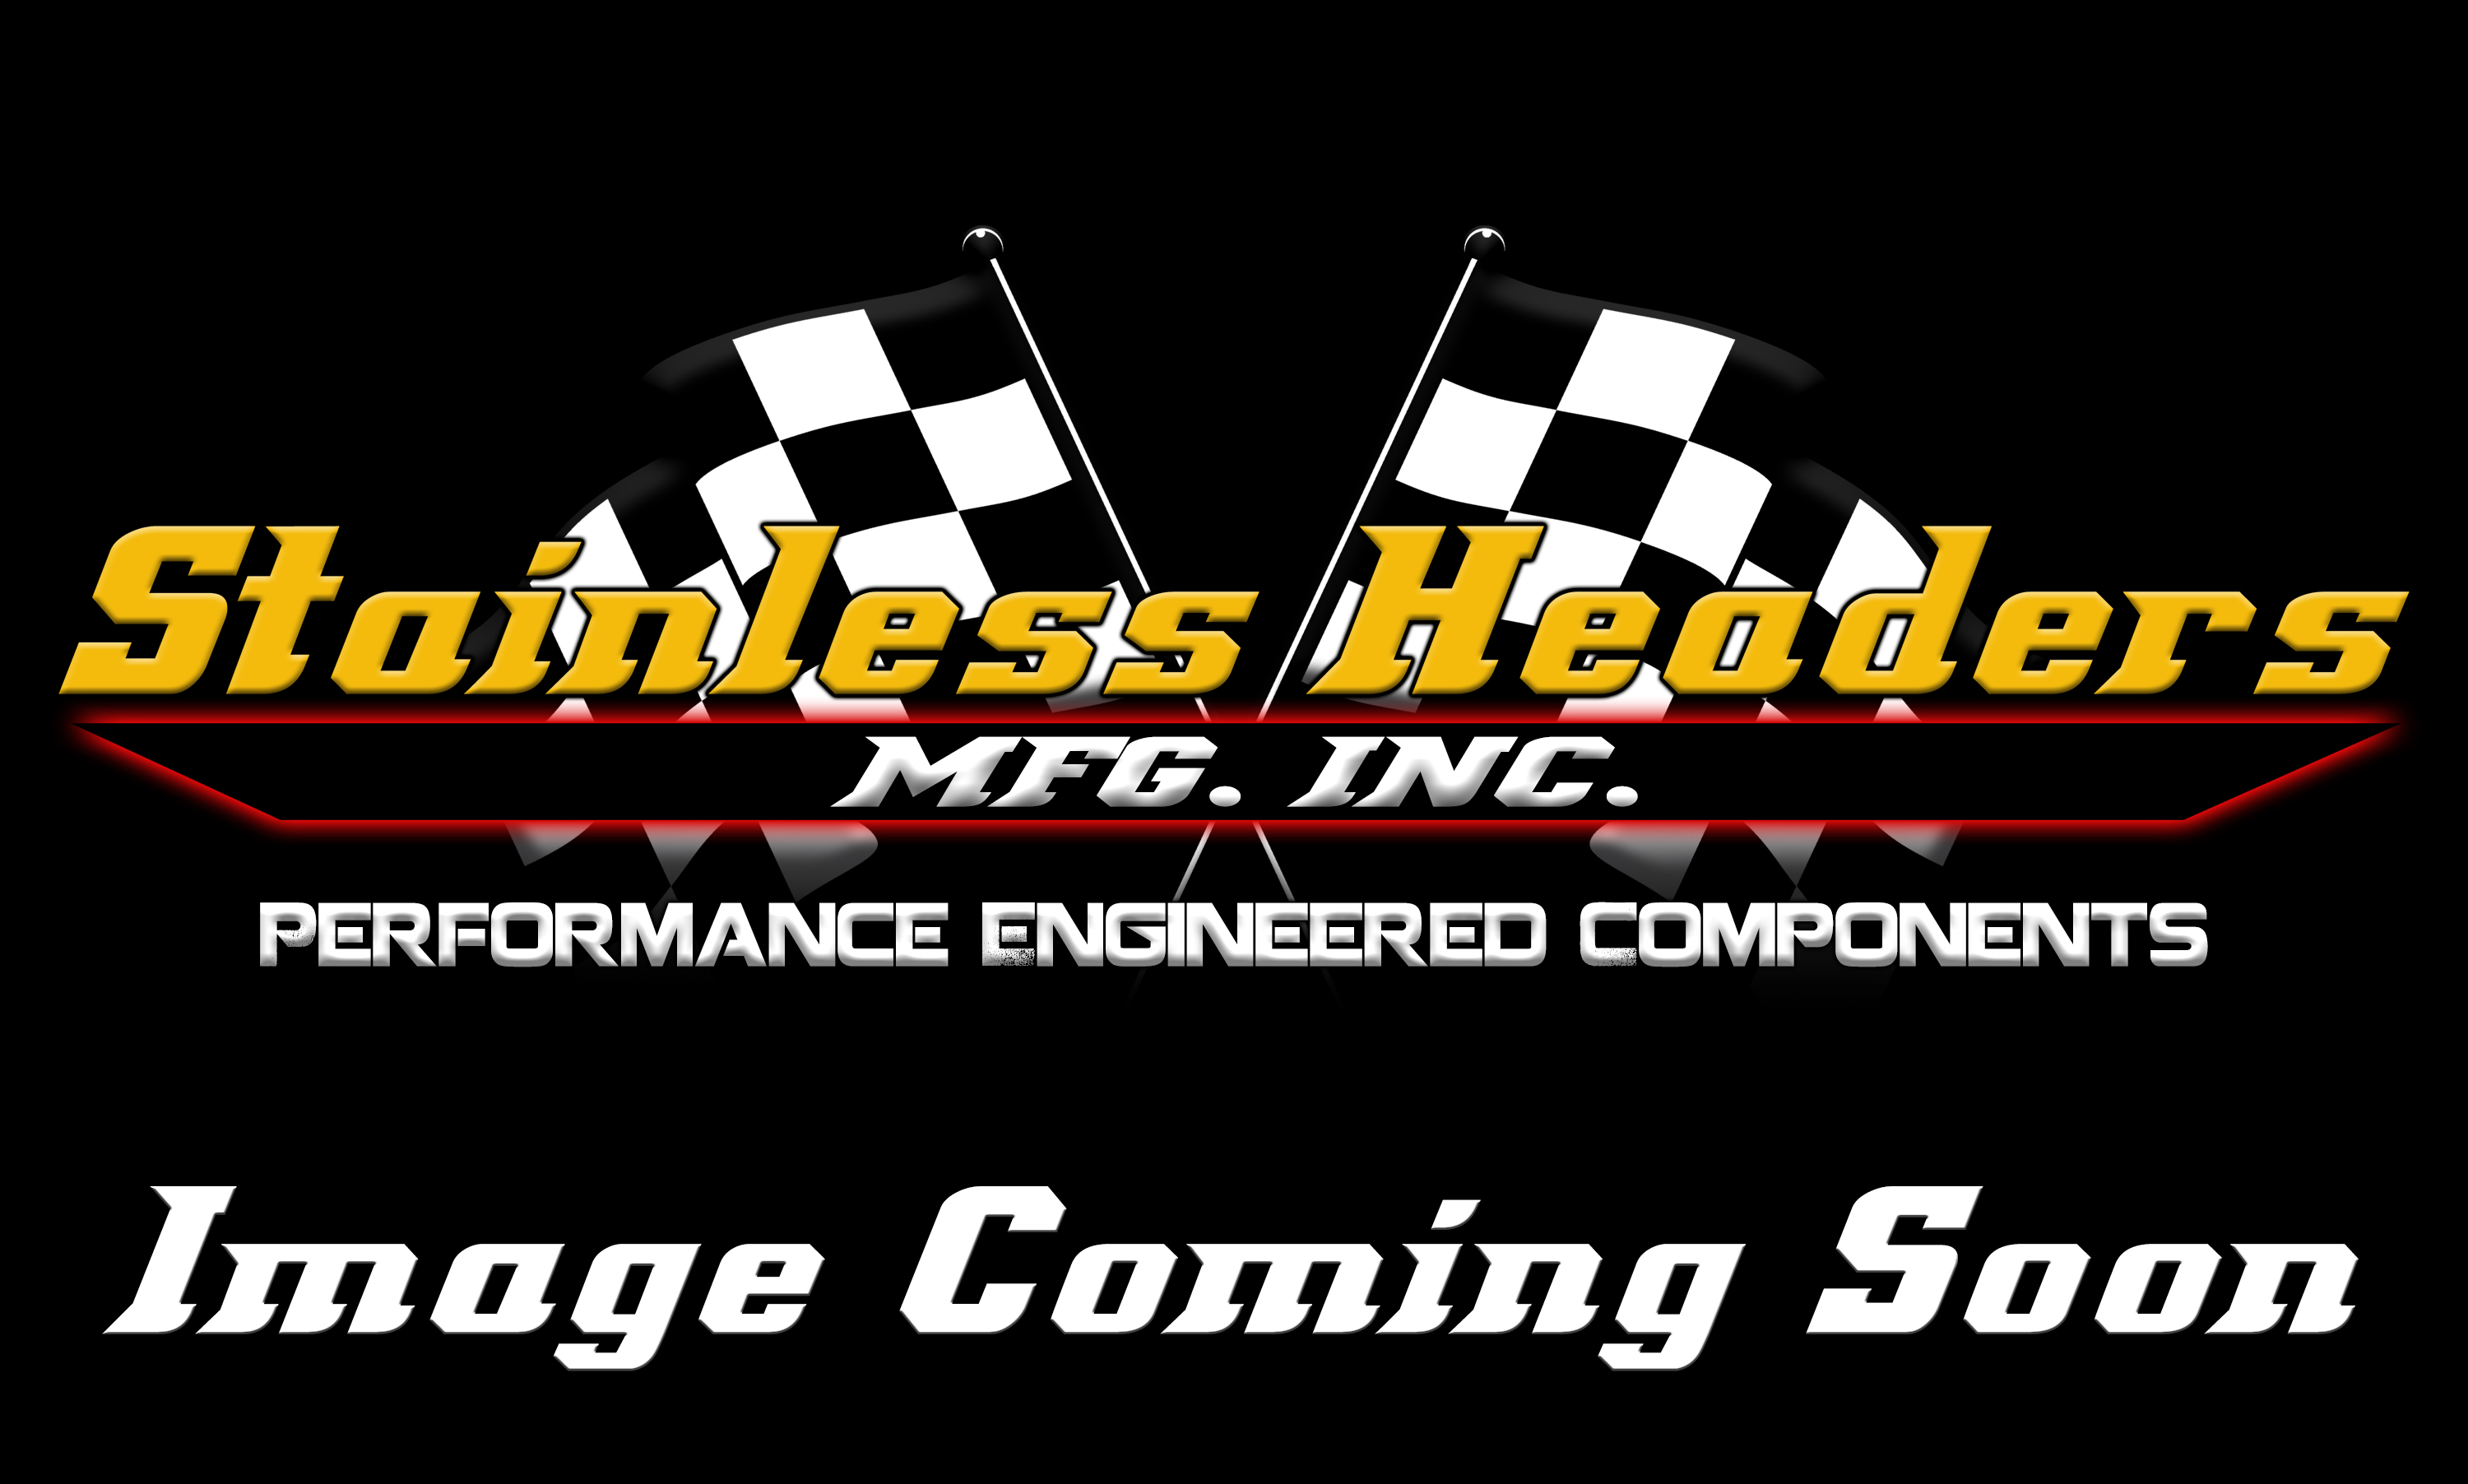 CompTurbo Technologies - CTR4518R-8388 Mid Frame Oil-Less 3.0 Turbocharger (1500 HP)